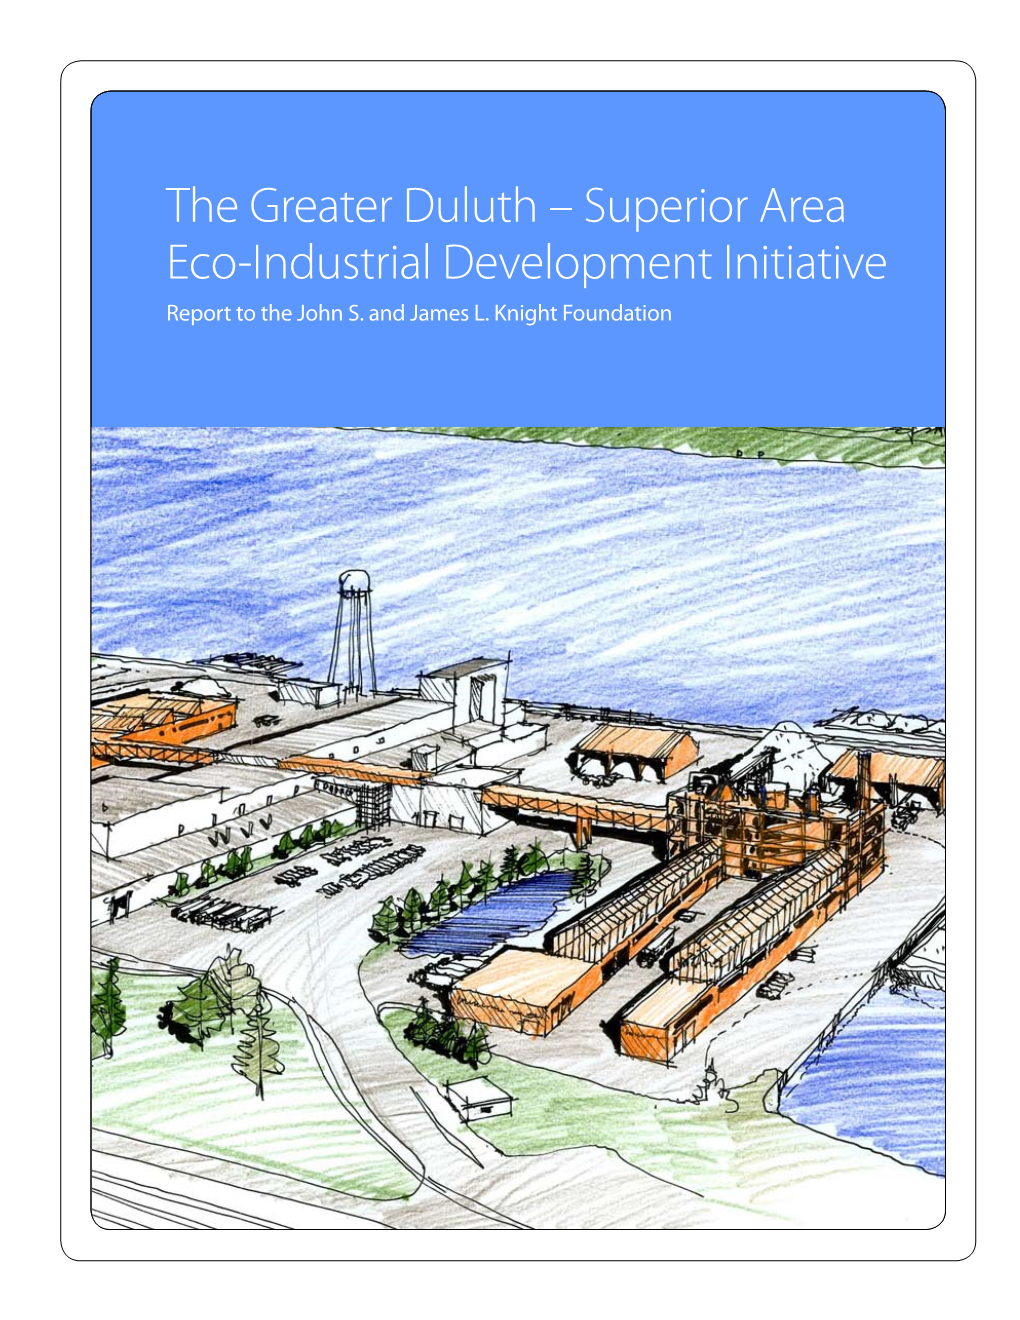 The Greater Duluth–Superior Area Eco-Industrial Development Initiative